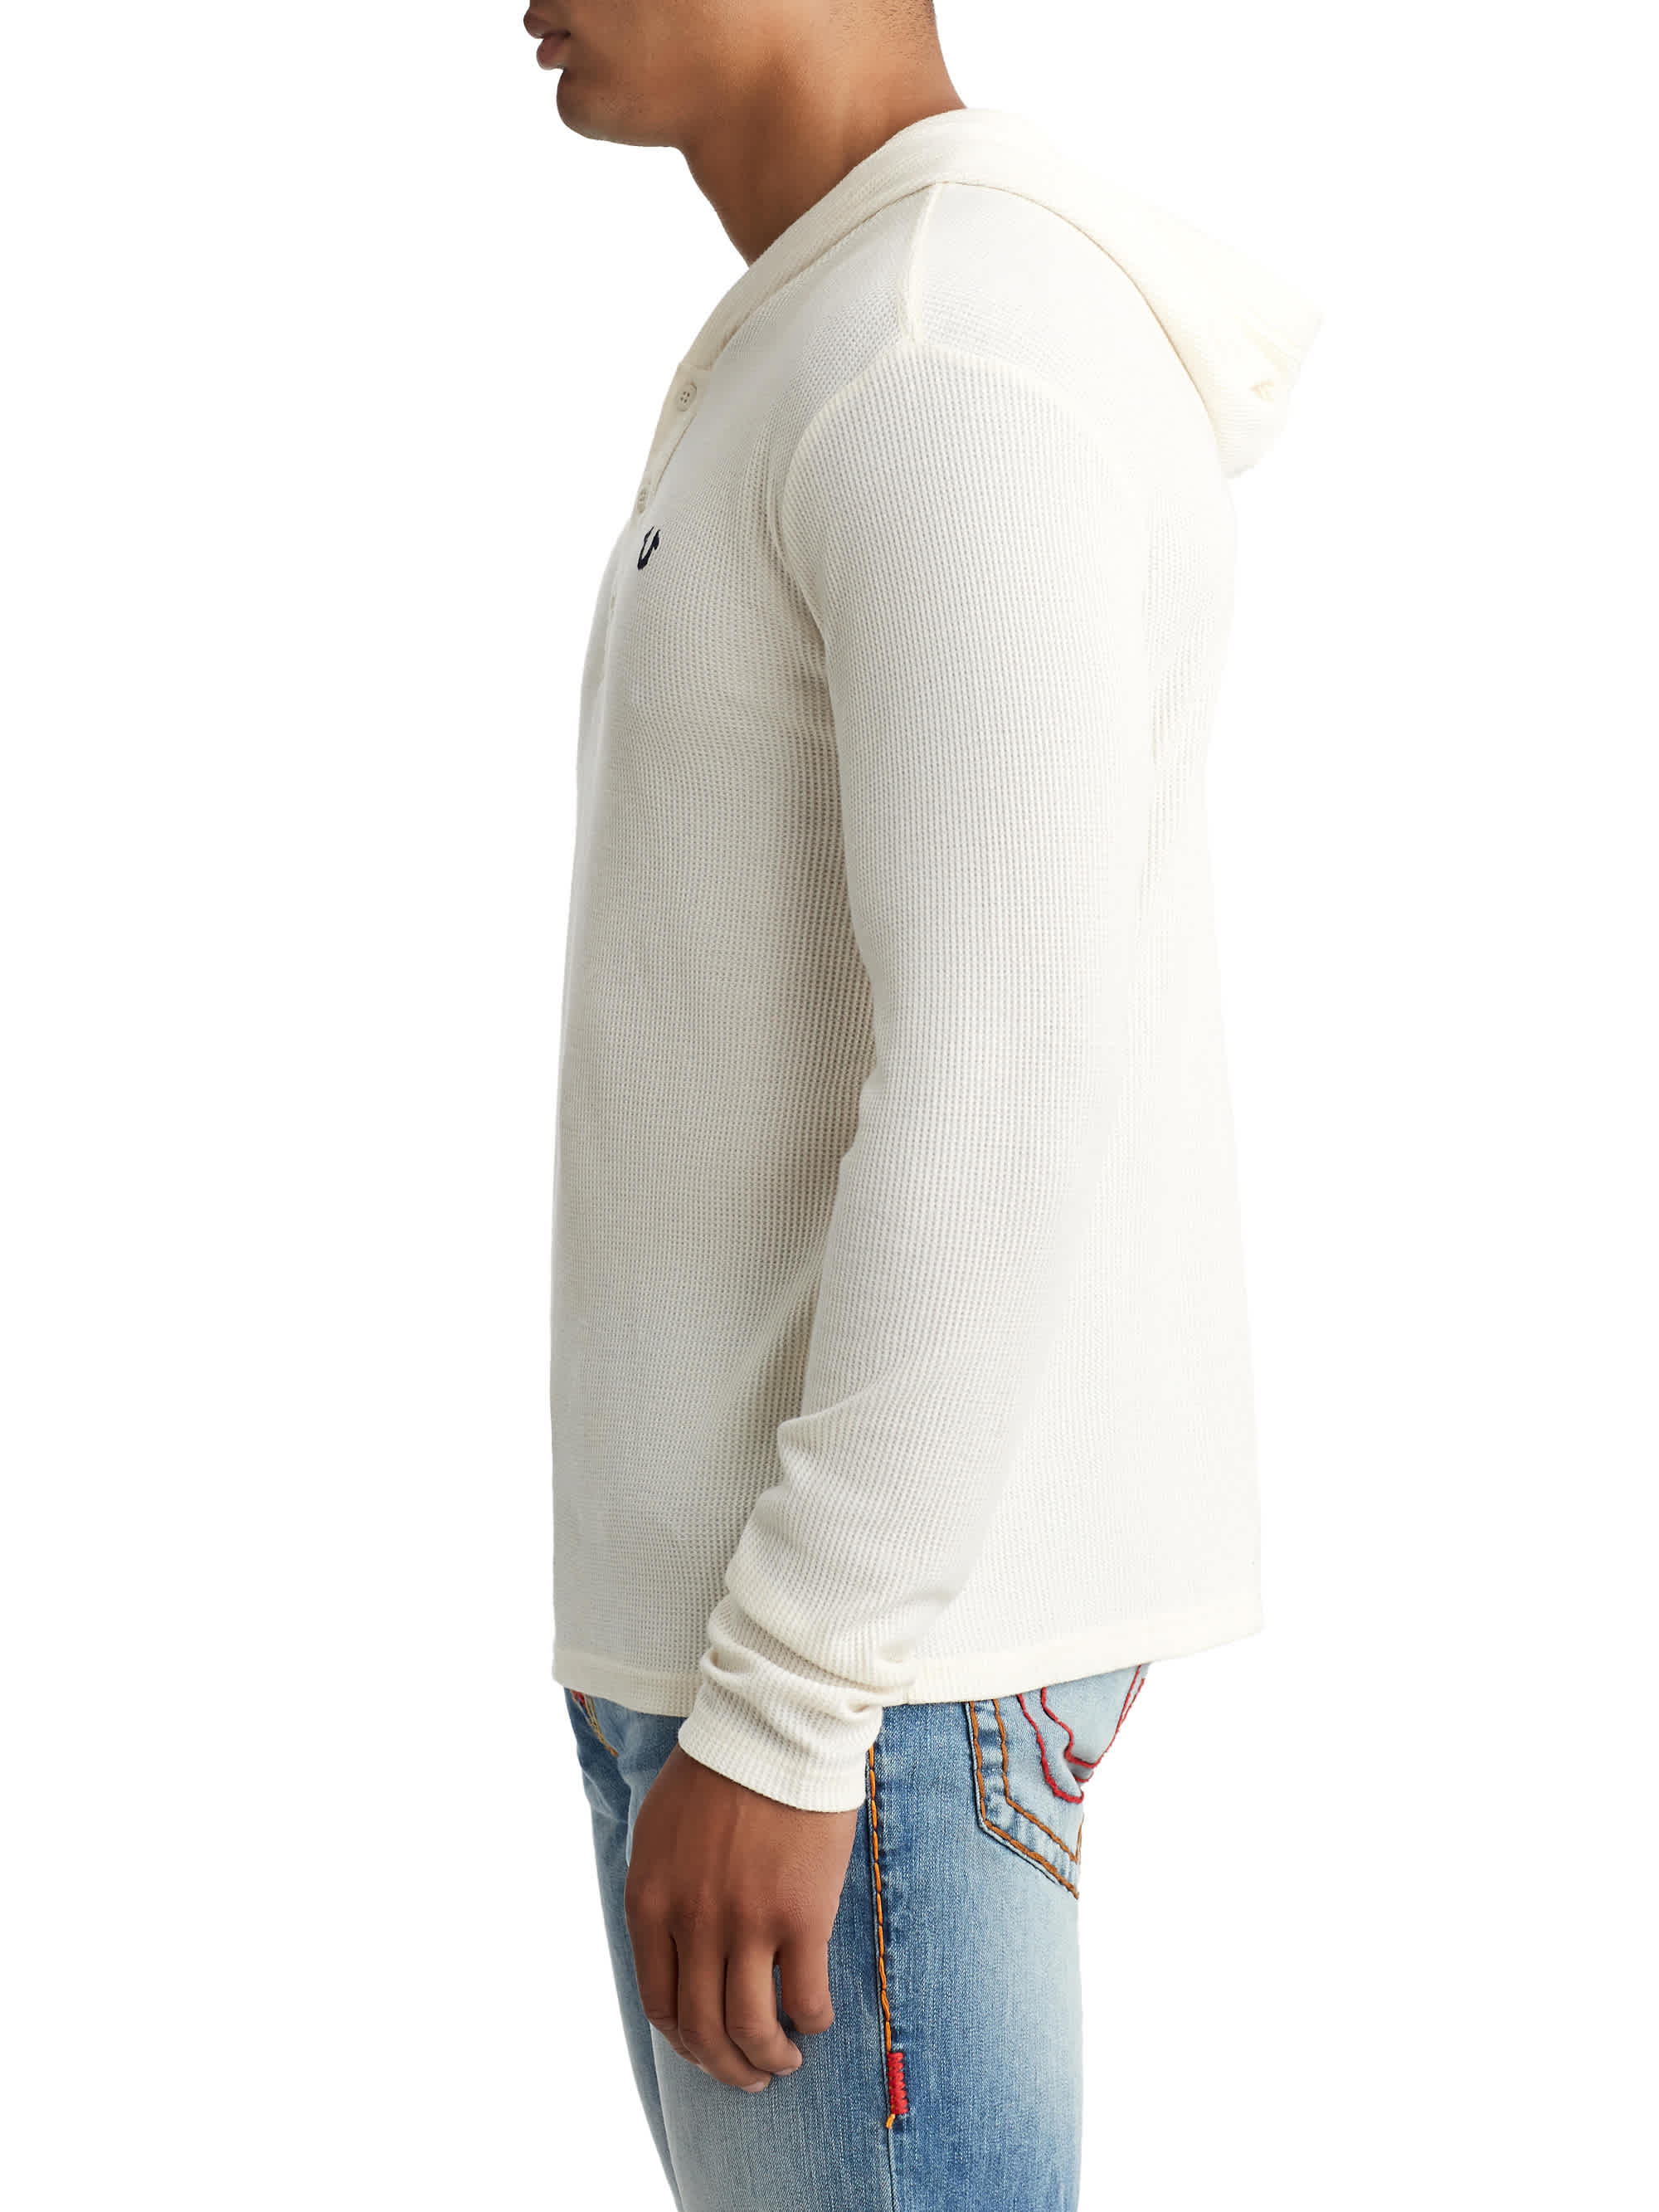 MENS HOODED THERMAL HENLEY